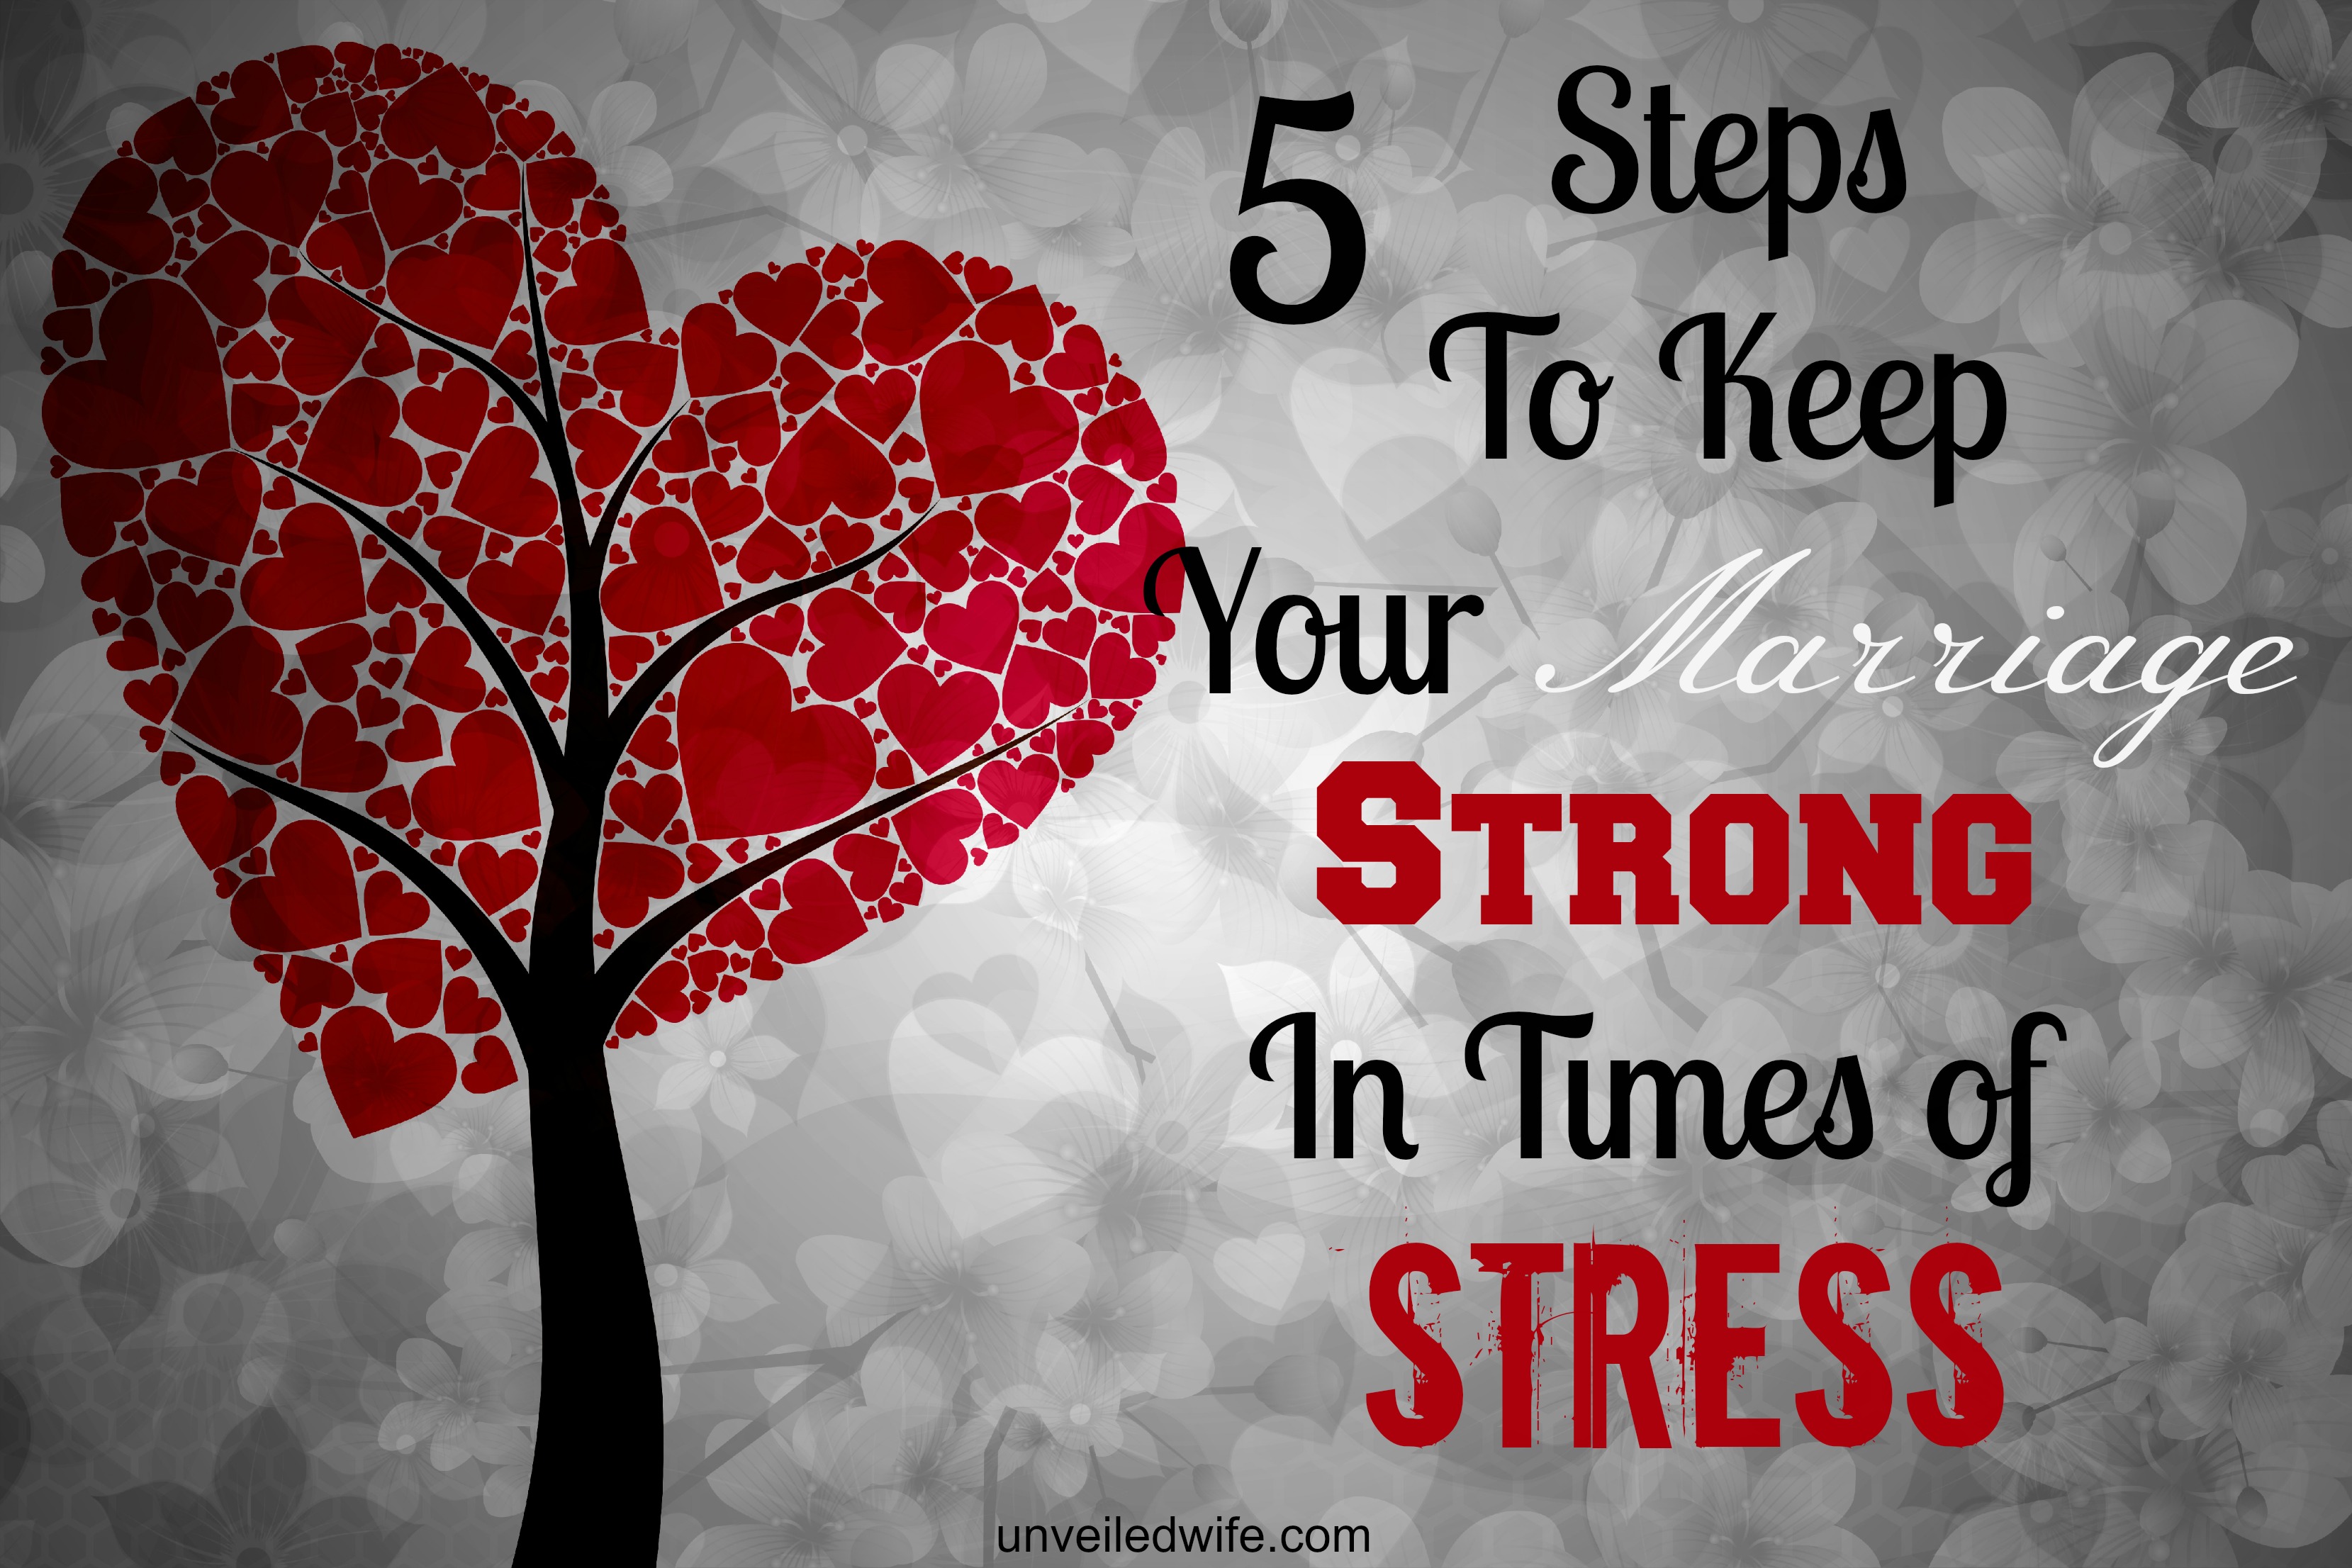 Five Steps To Keep Your Marriage Strong In Times of Stress